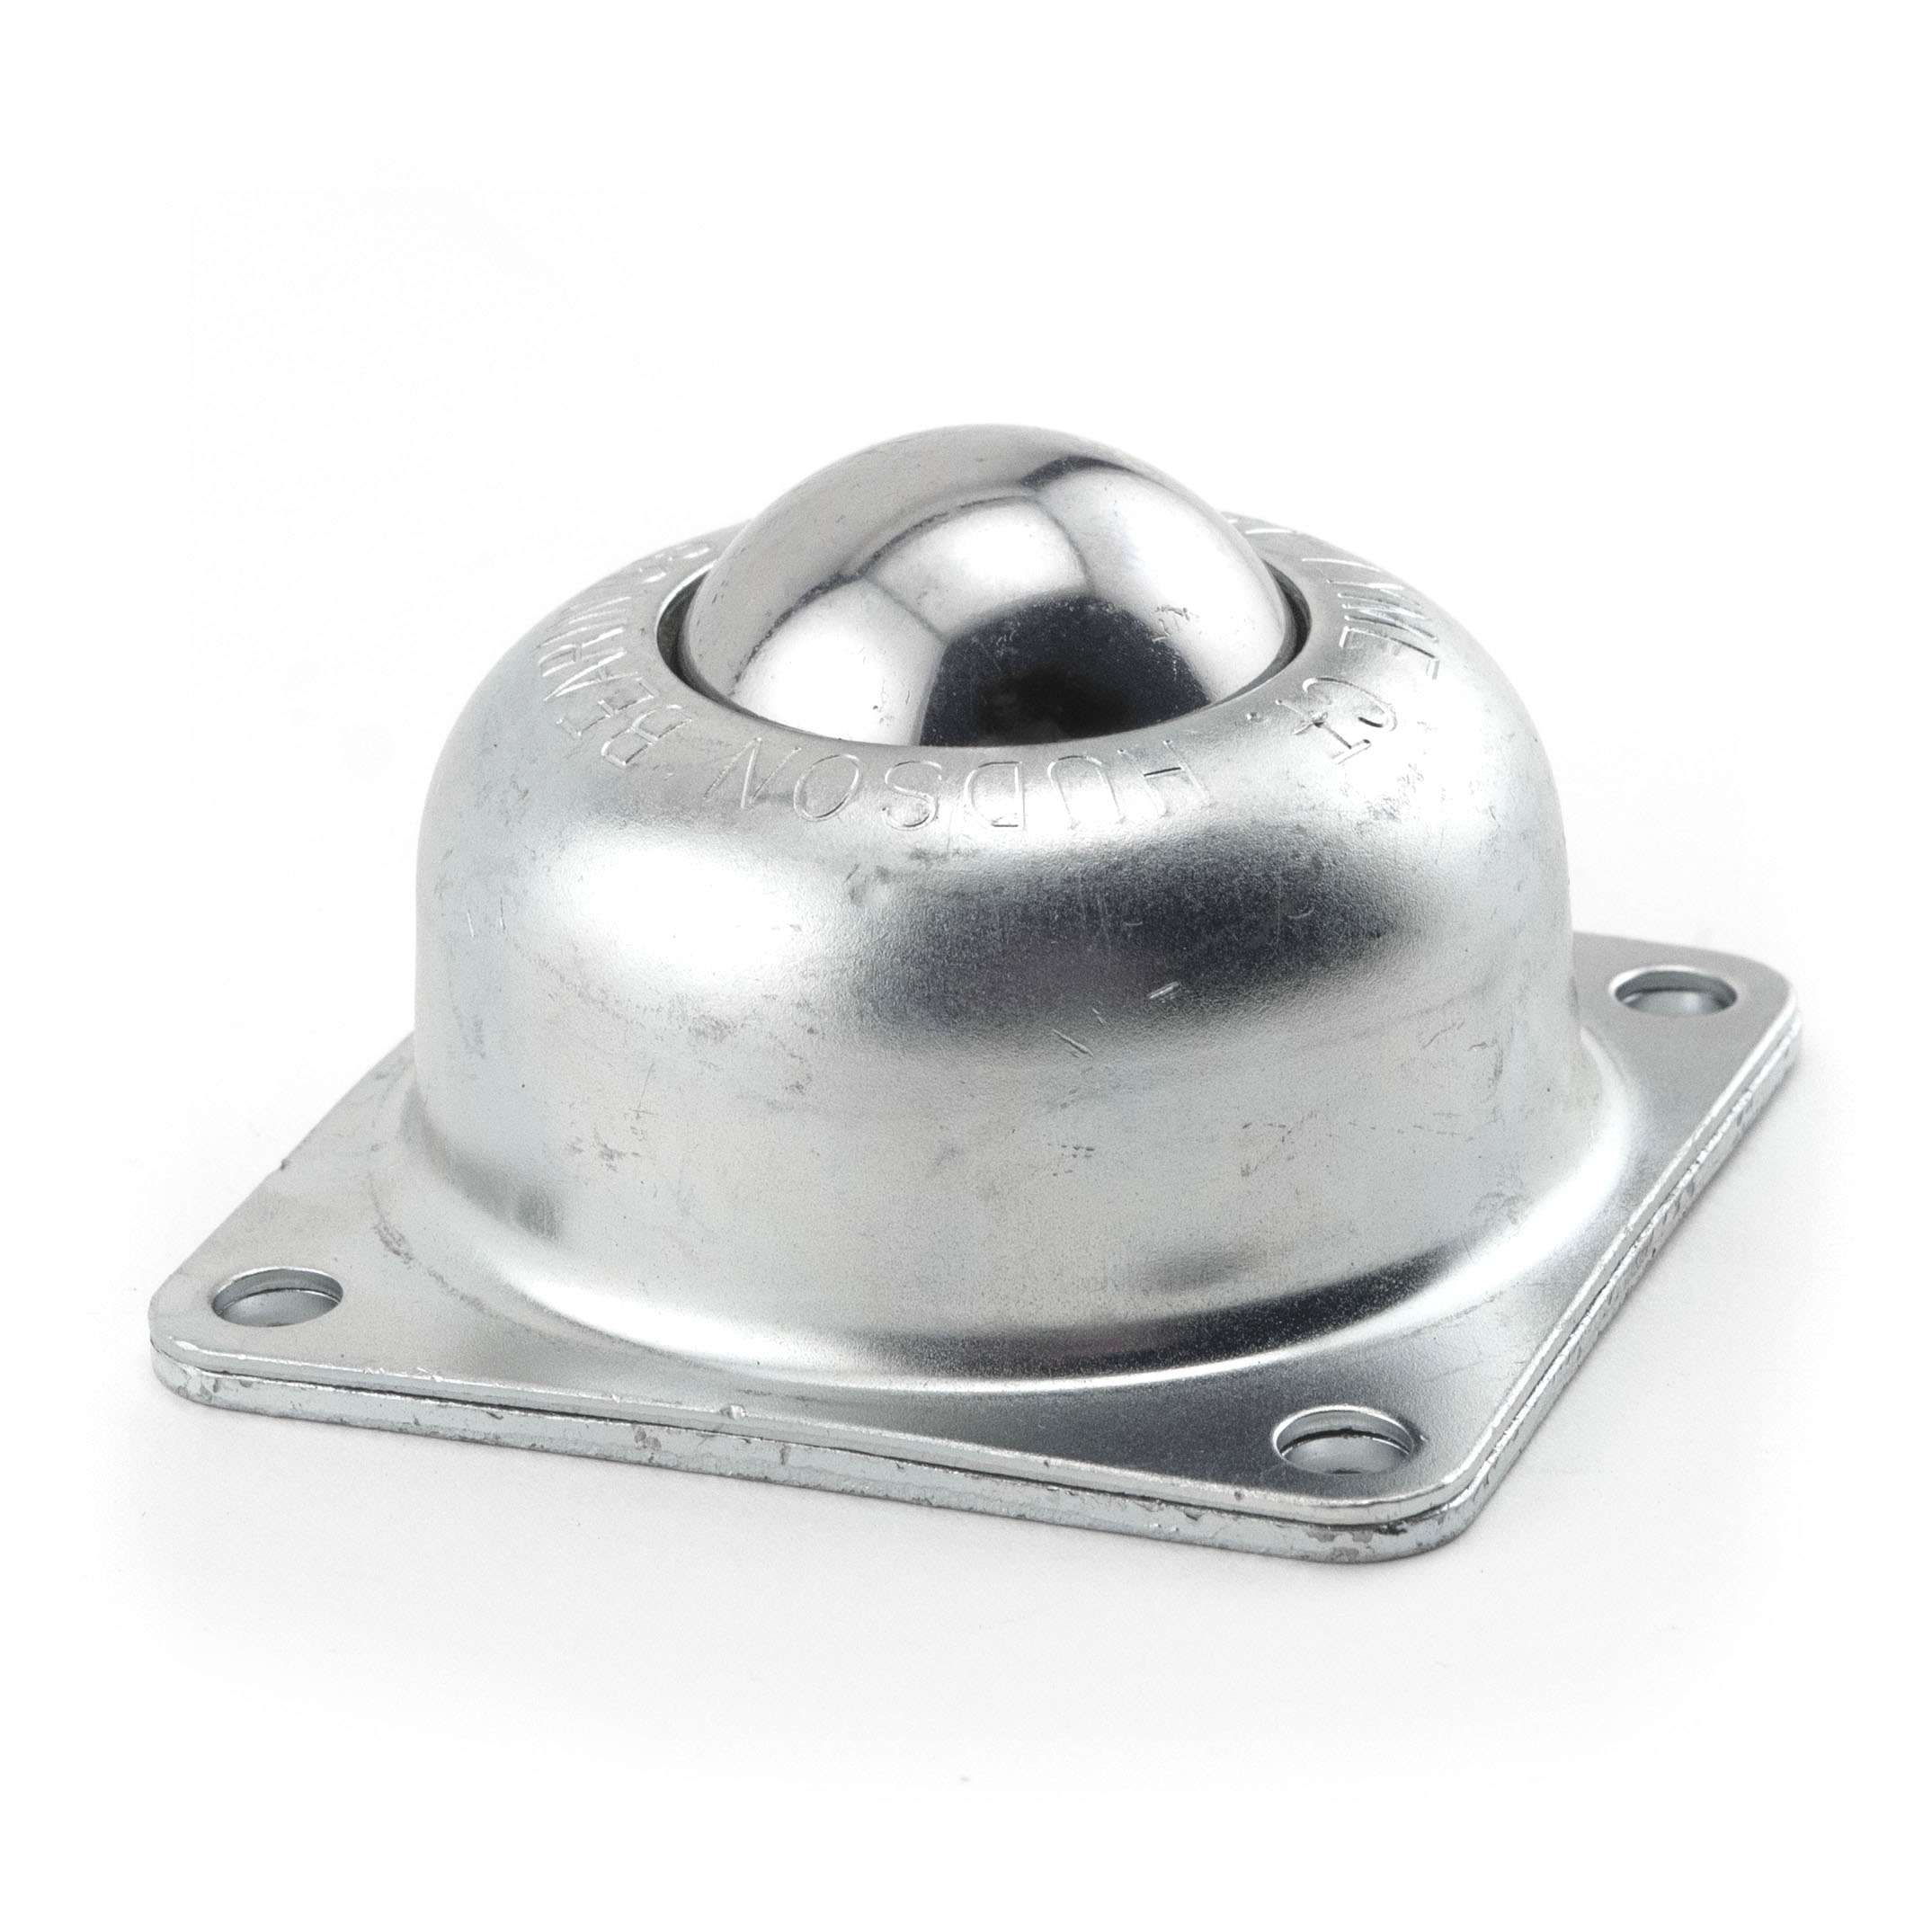 Ball Transfer; 1-1/2" ball; Stainless Steel; Flange (3"x3"; holes: 2-7/16"x2-7/16"; 1/4" bolt); Carbon Steel Housing; 250#; 1-13/16" load height (Item #89351)